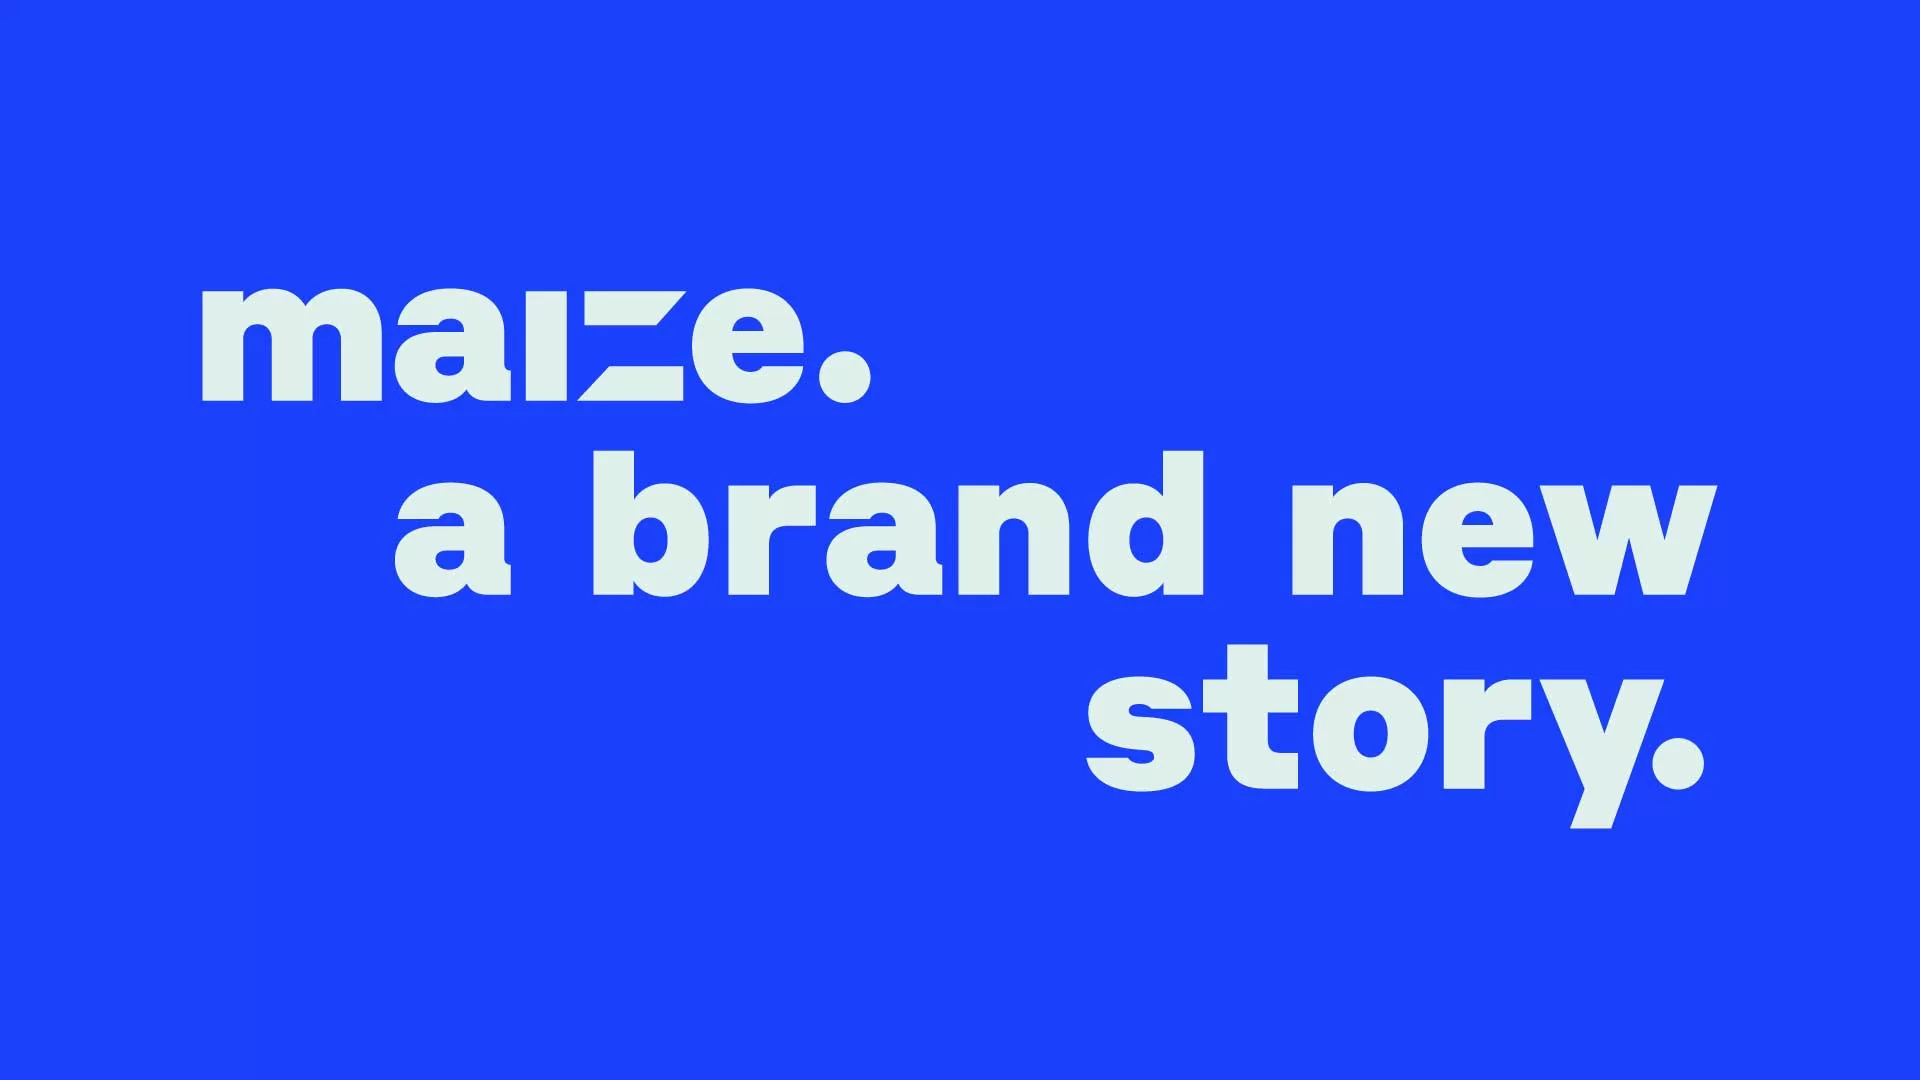 MAIZE. A brand new name to match our refreshed identity